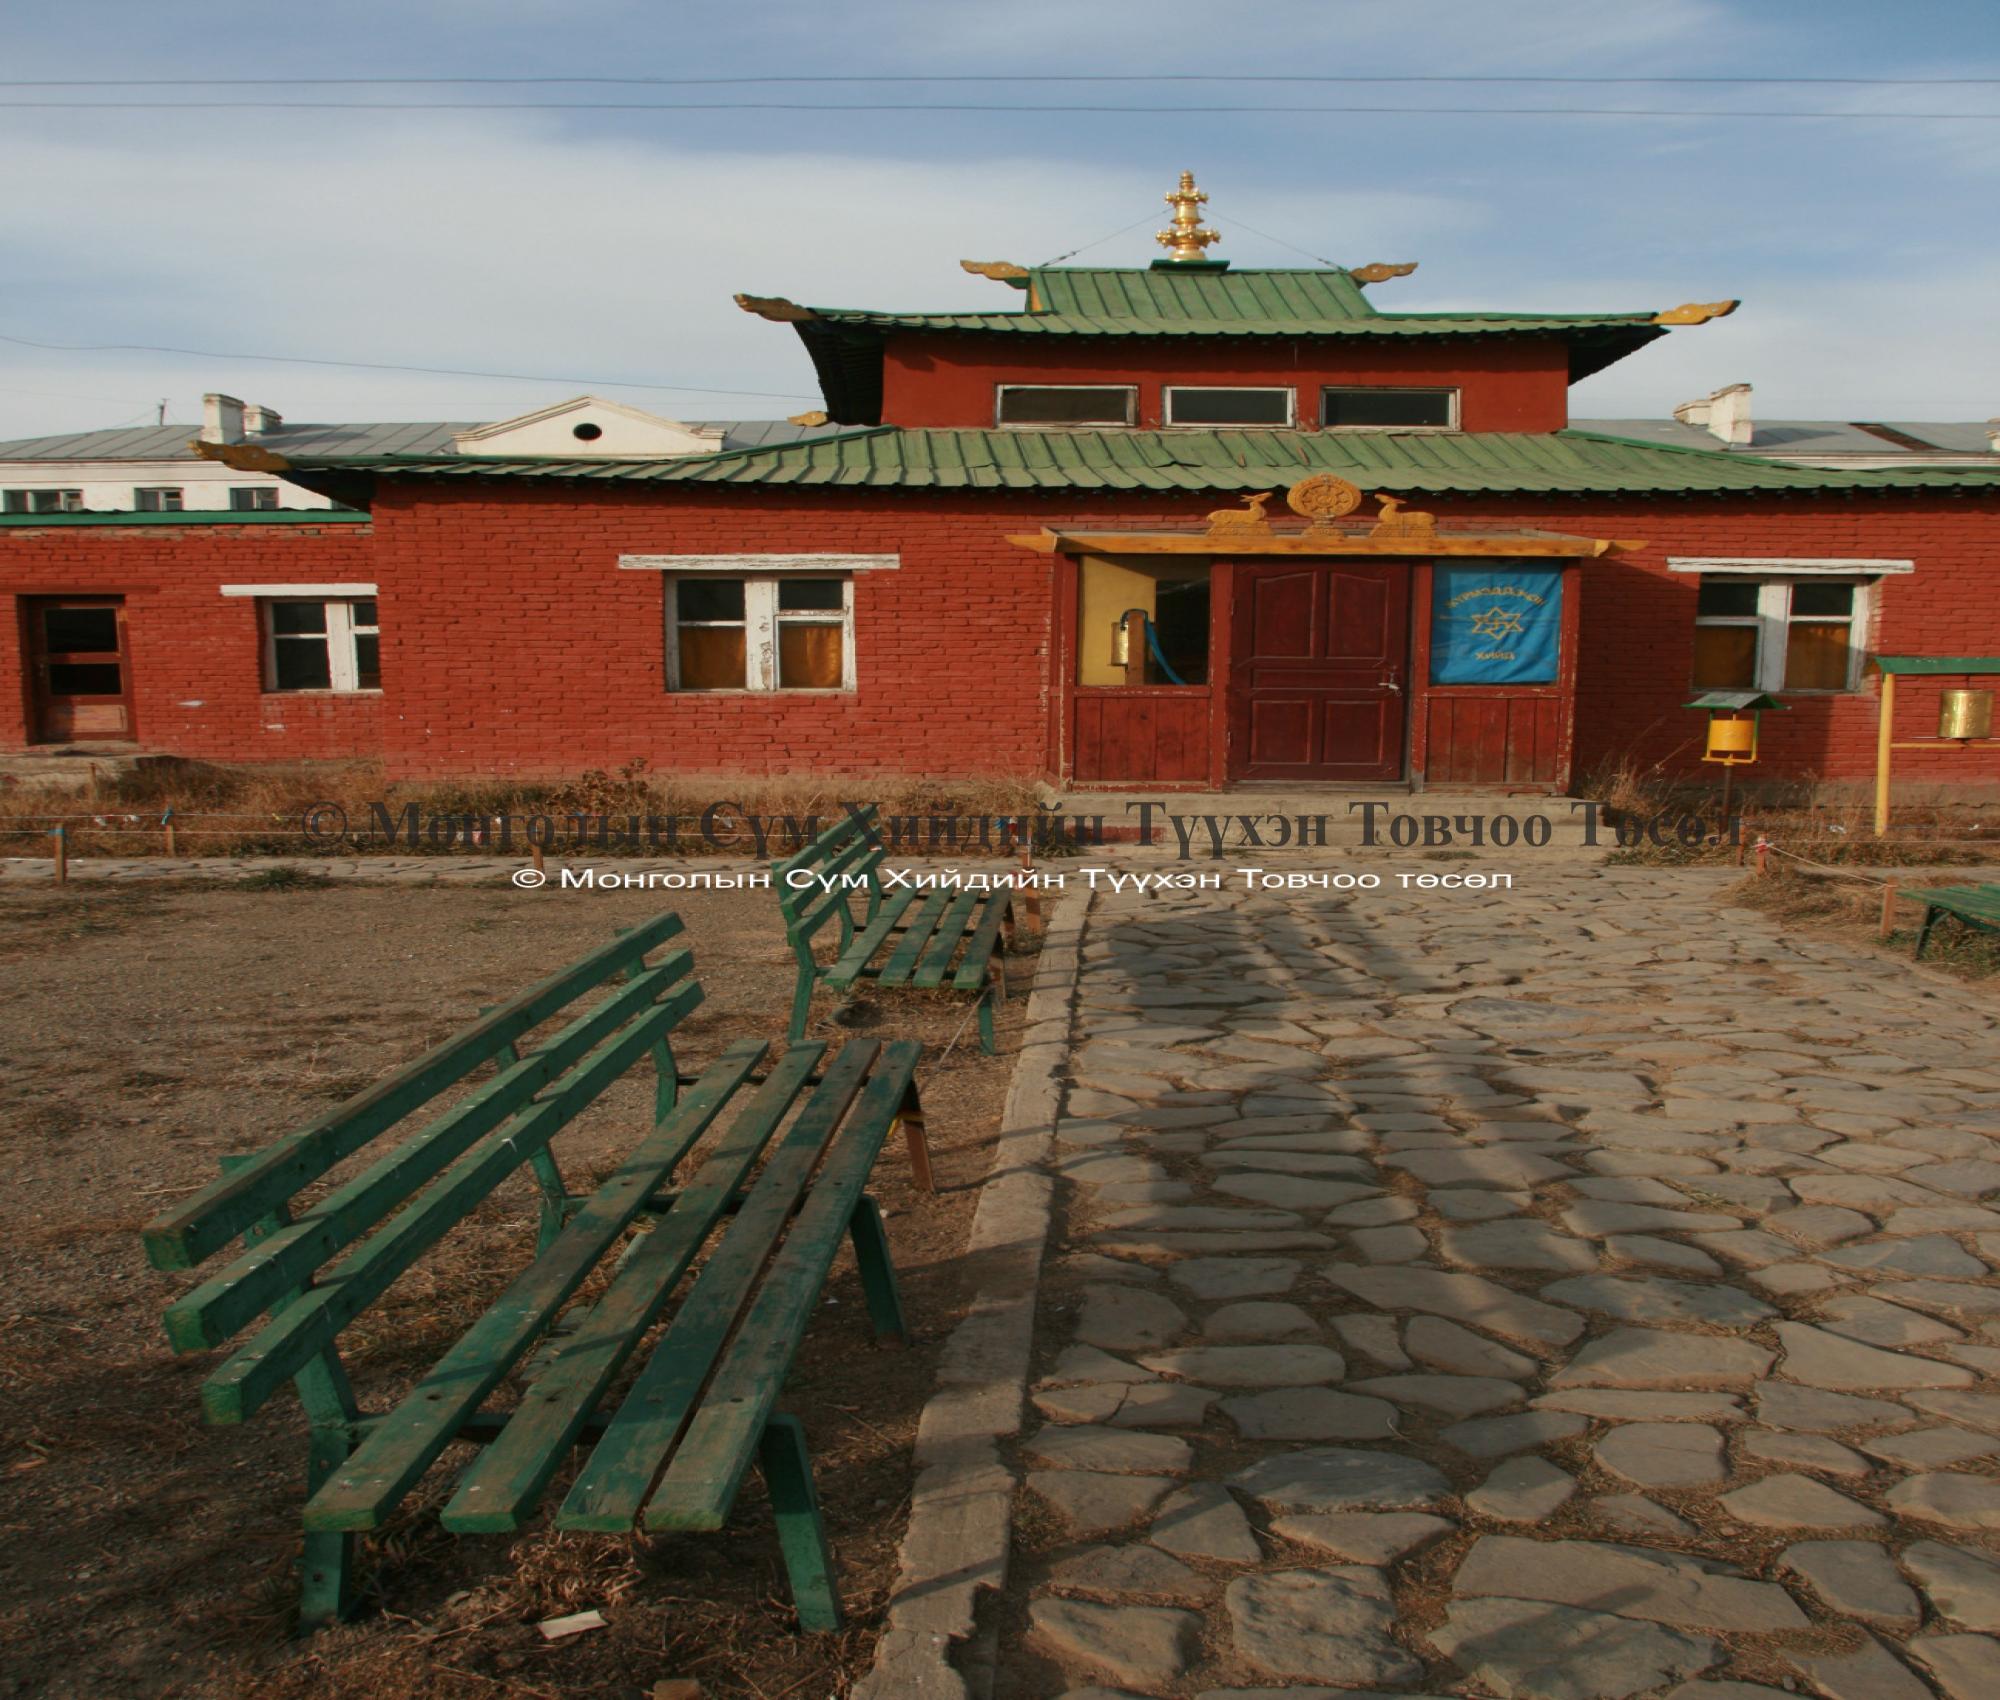 The temple building